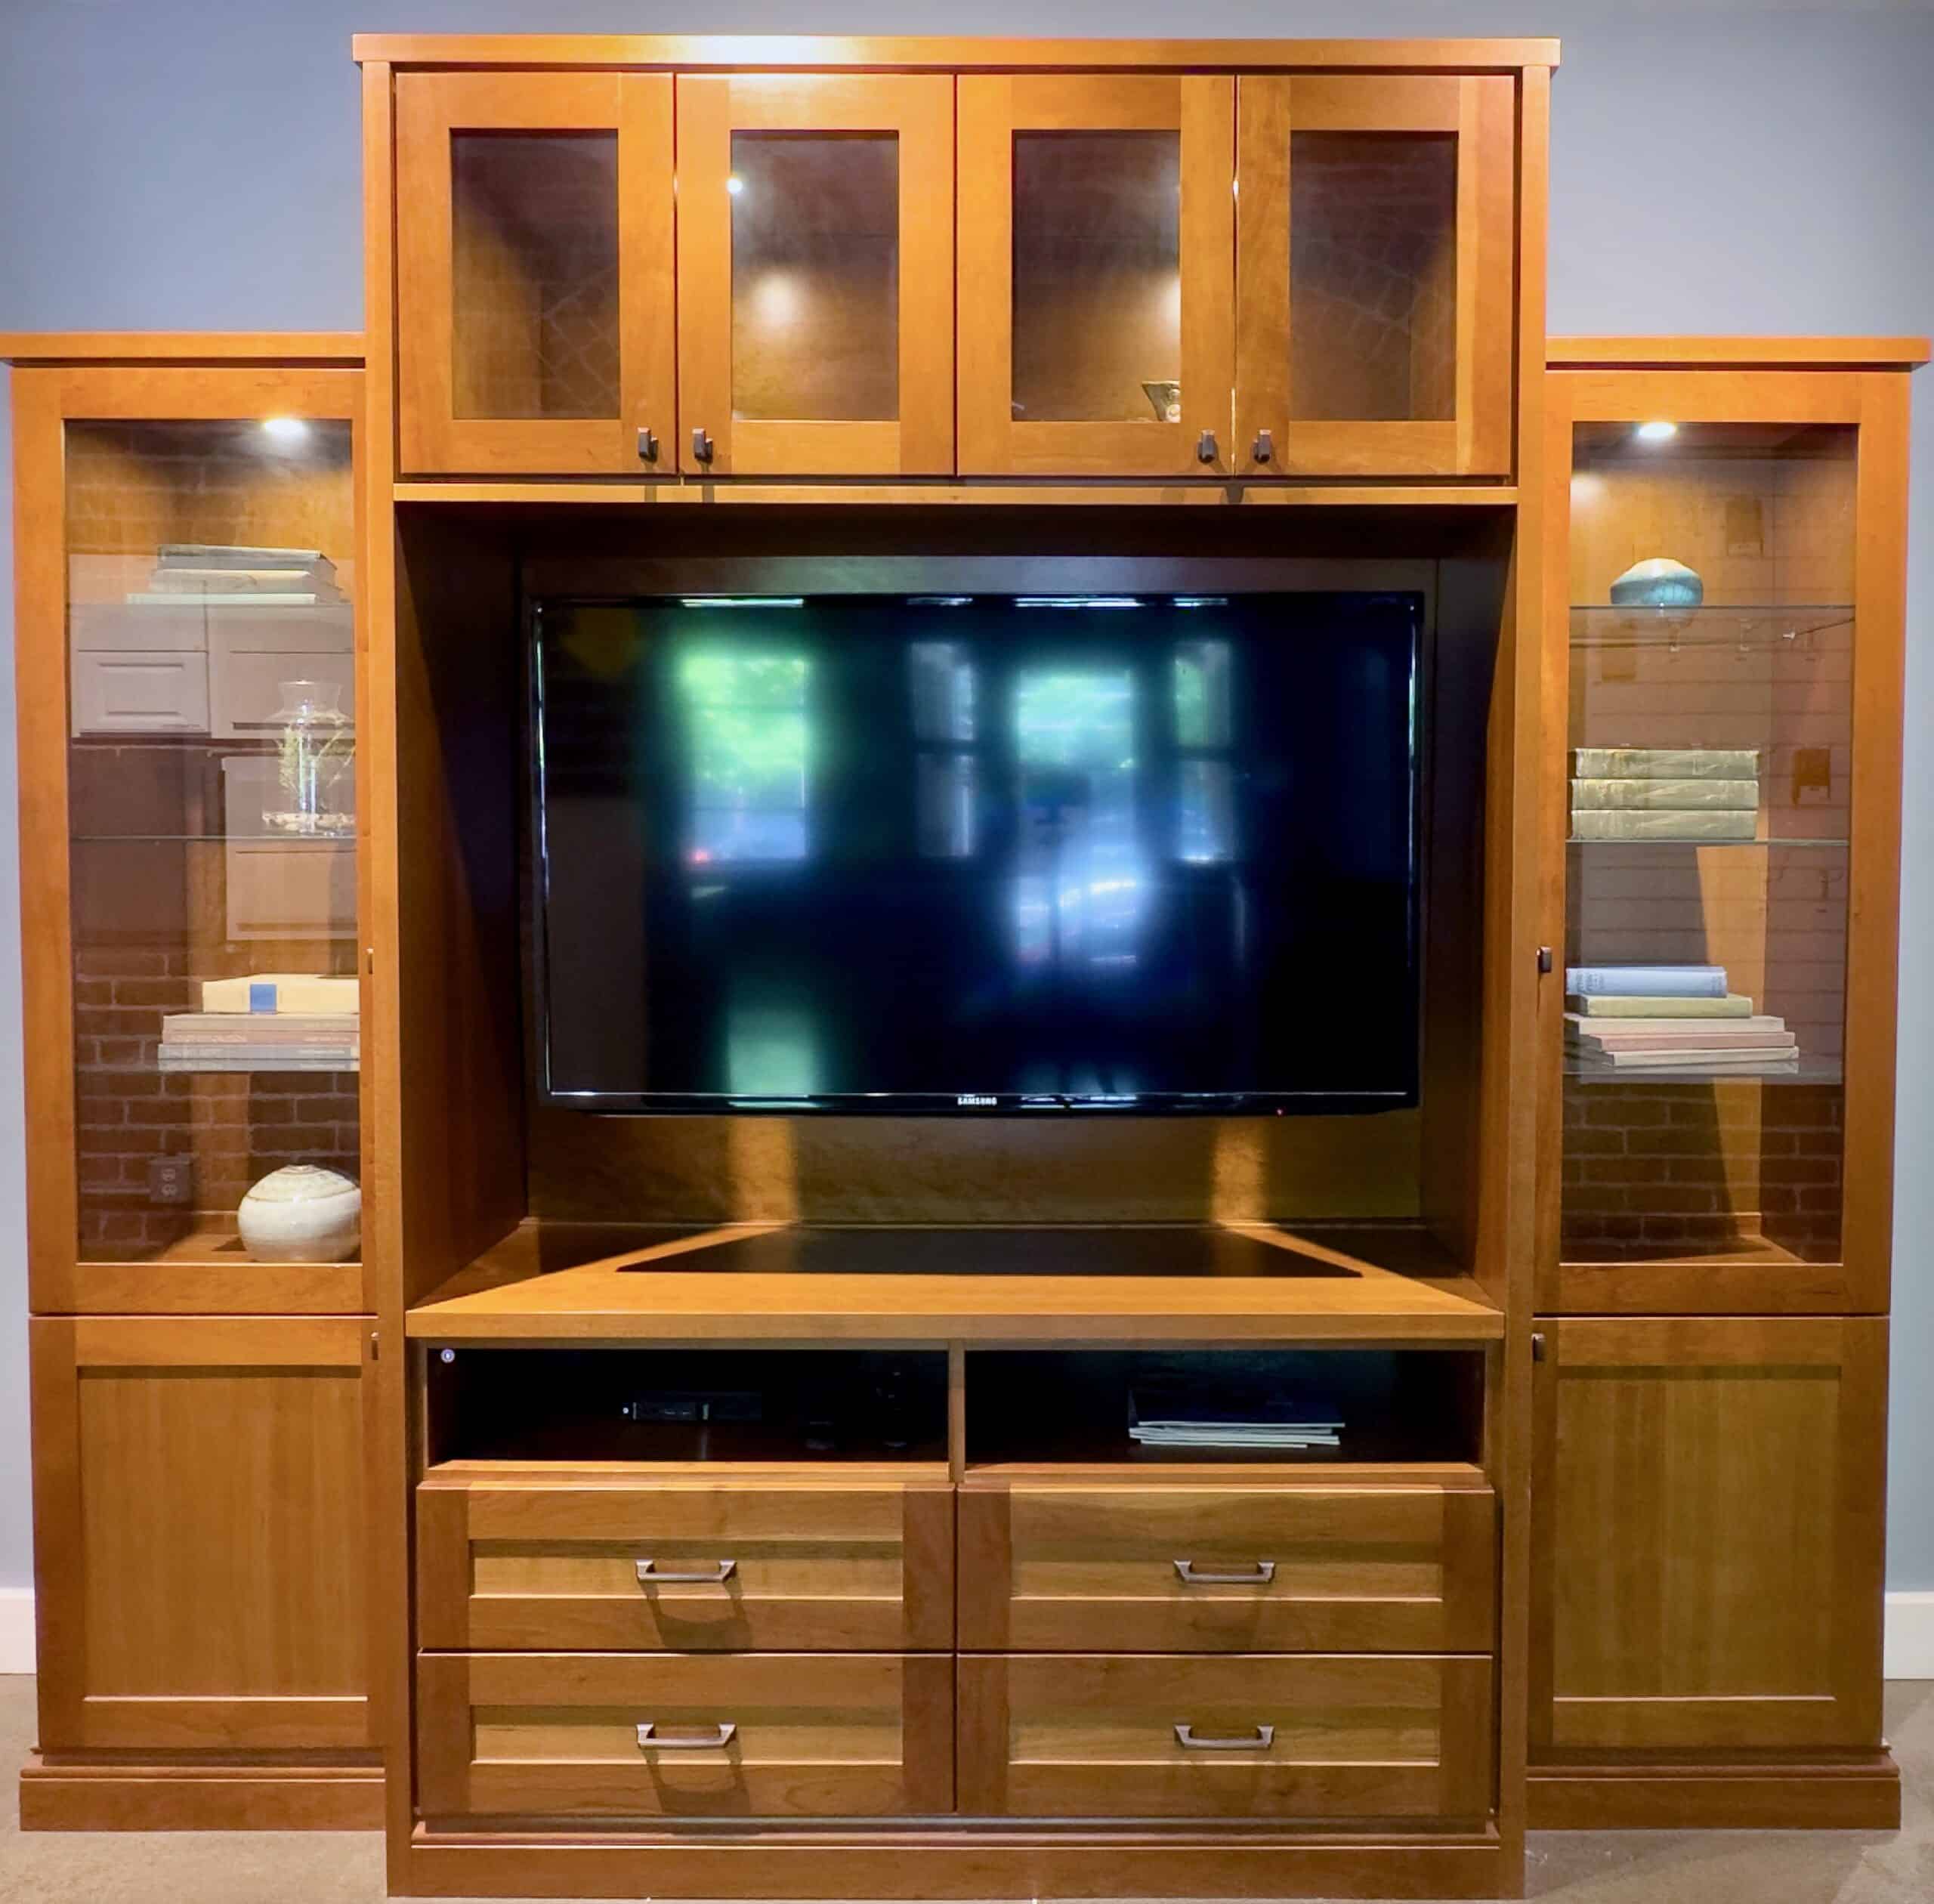 Custom Wood Entertainment Media Unit Center with glass doors, puck LED lighting, 5 piece shaker doors, glass shelves and drawers.